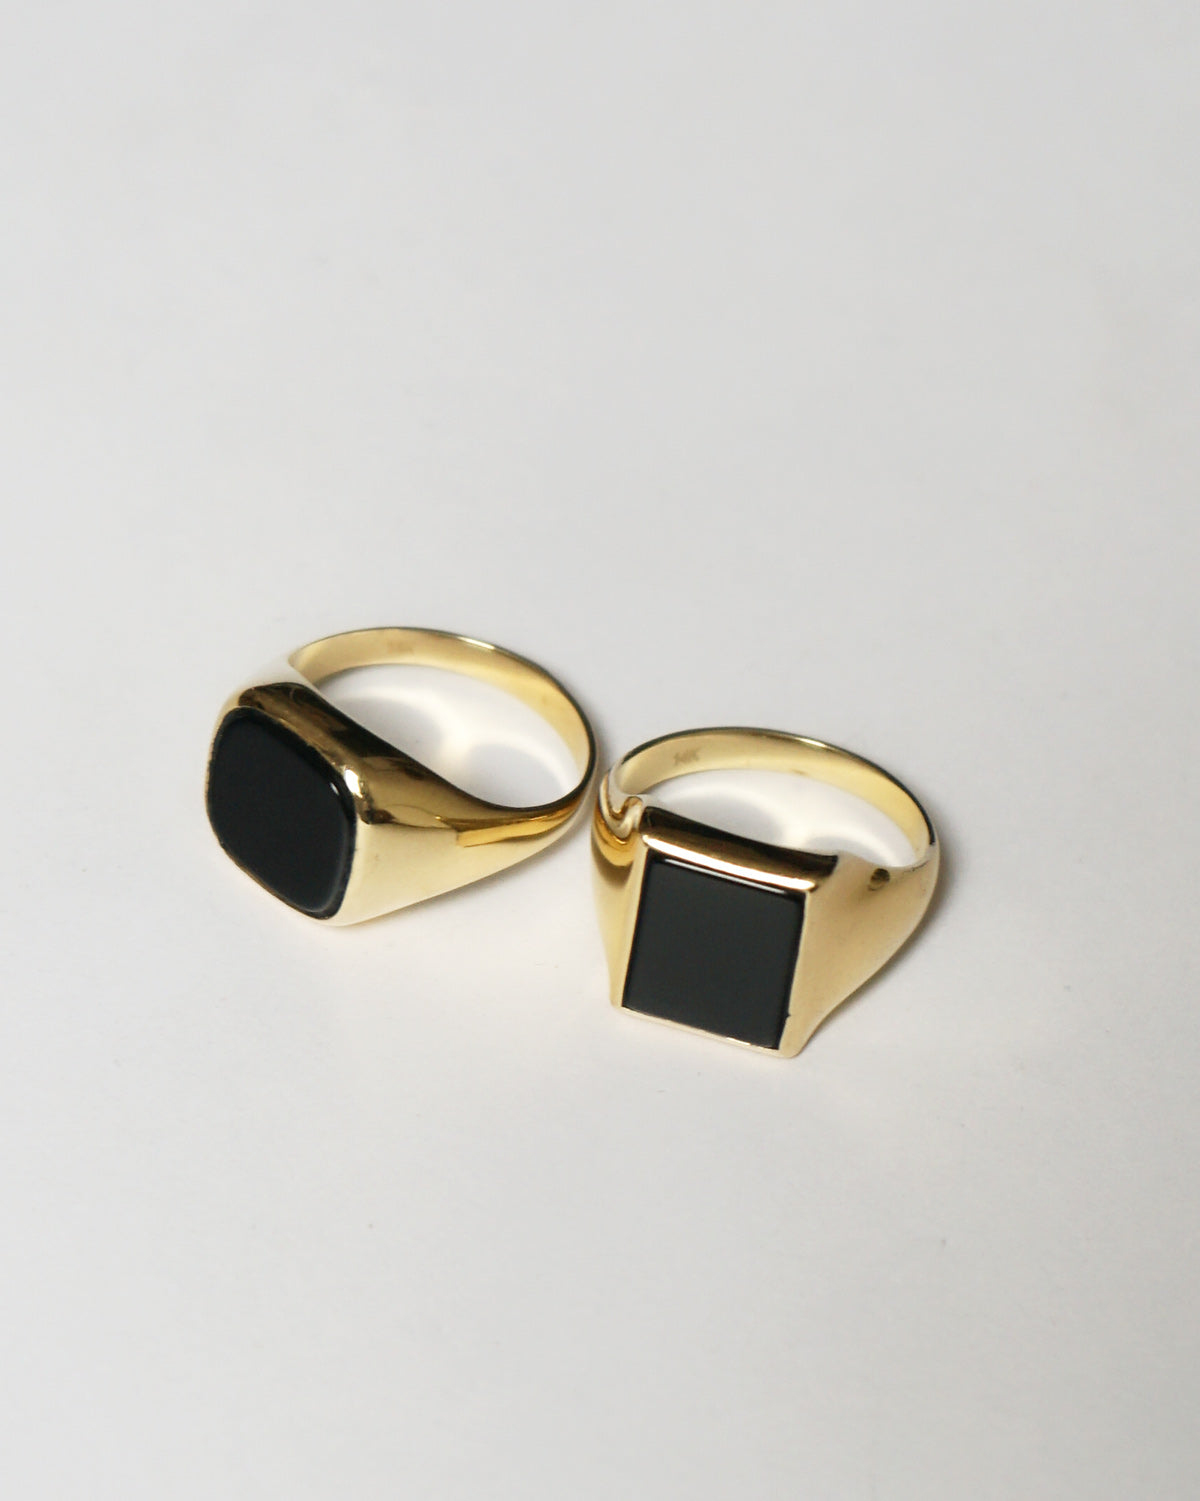 14k Gold Square Ring w/ Onyx / size: 10